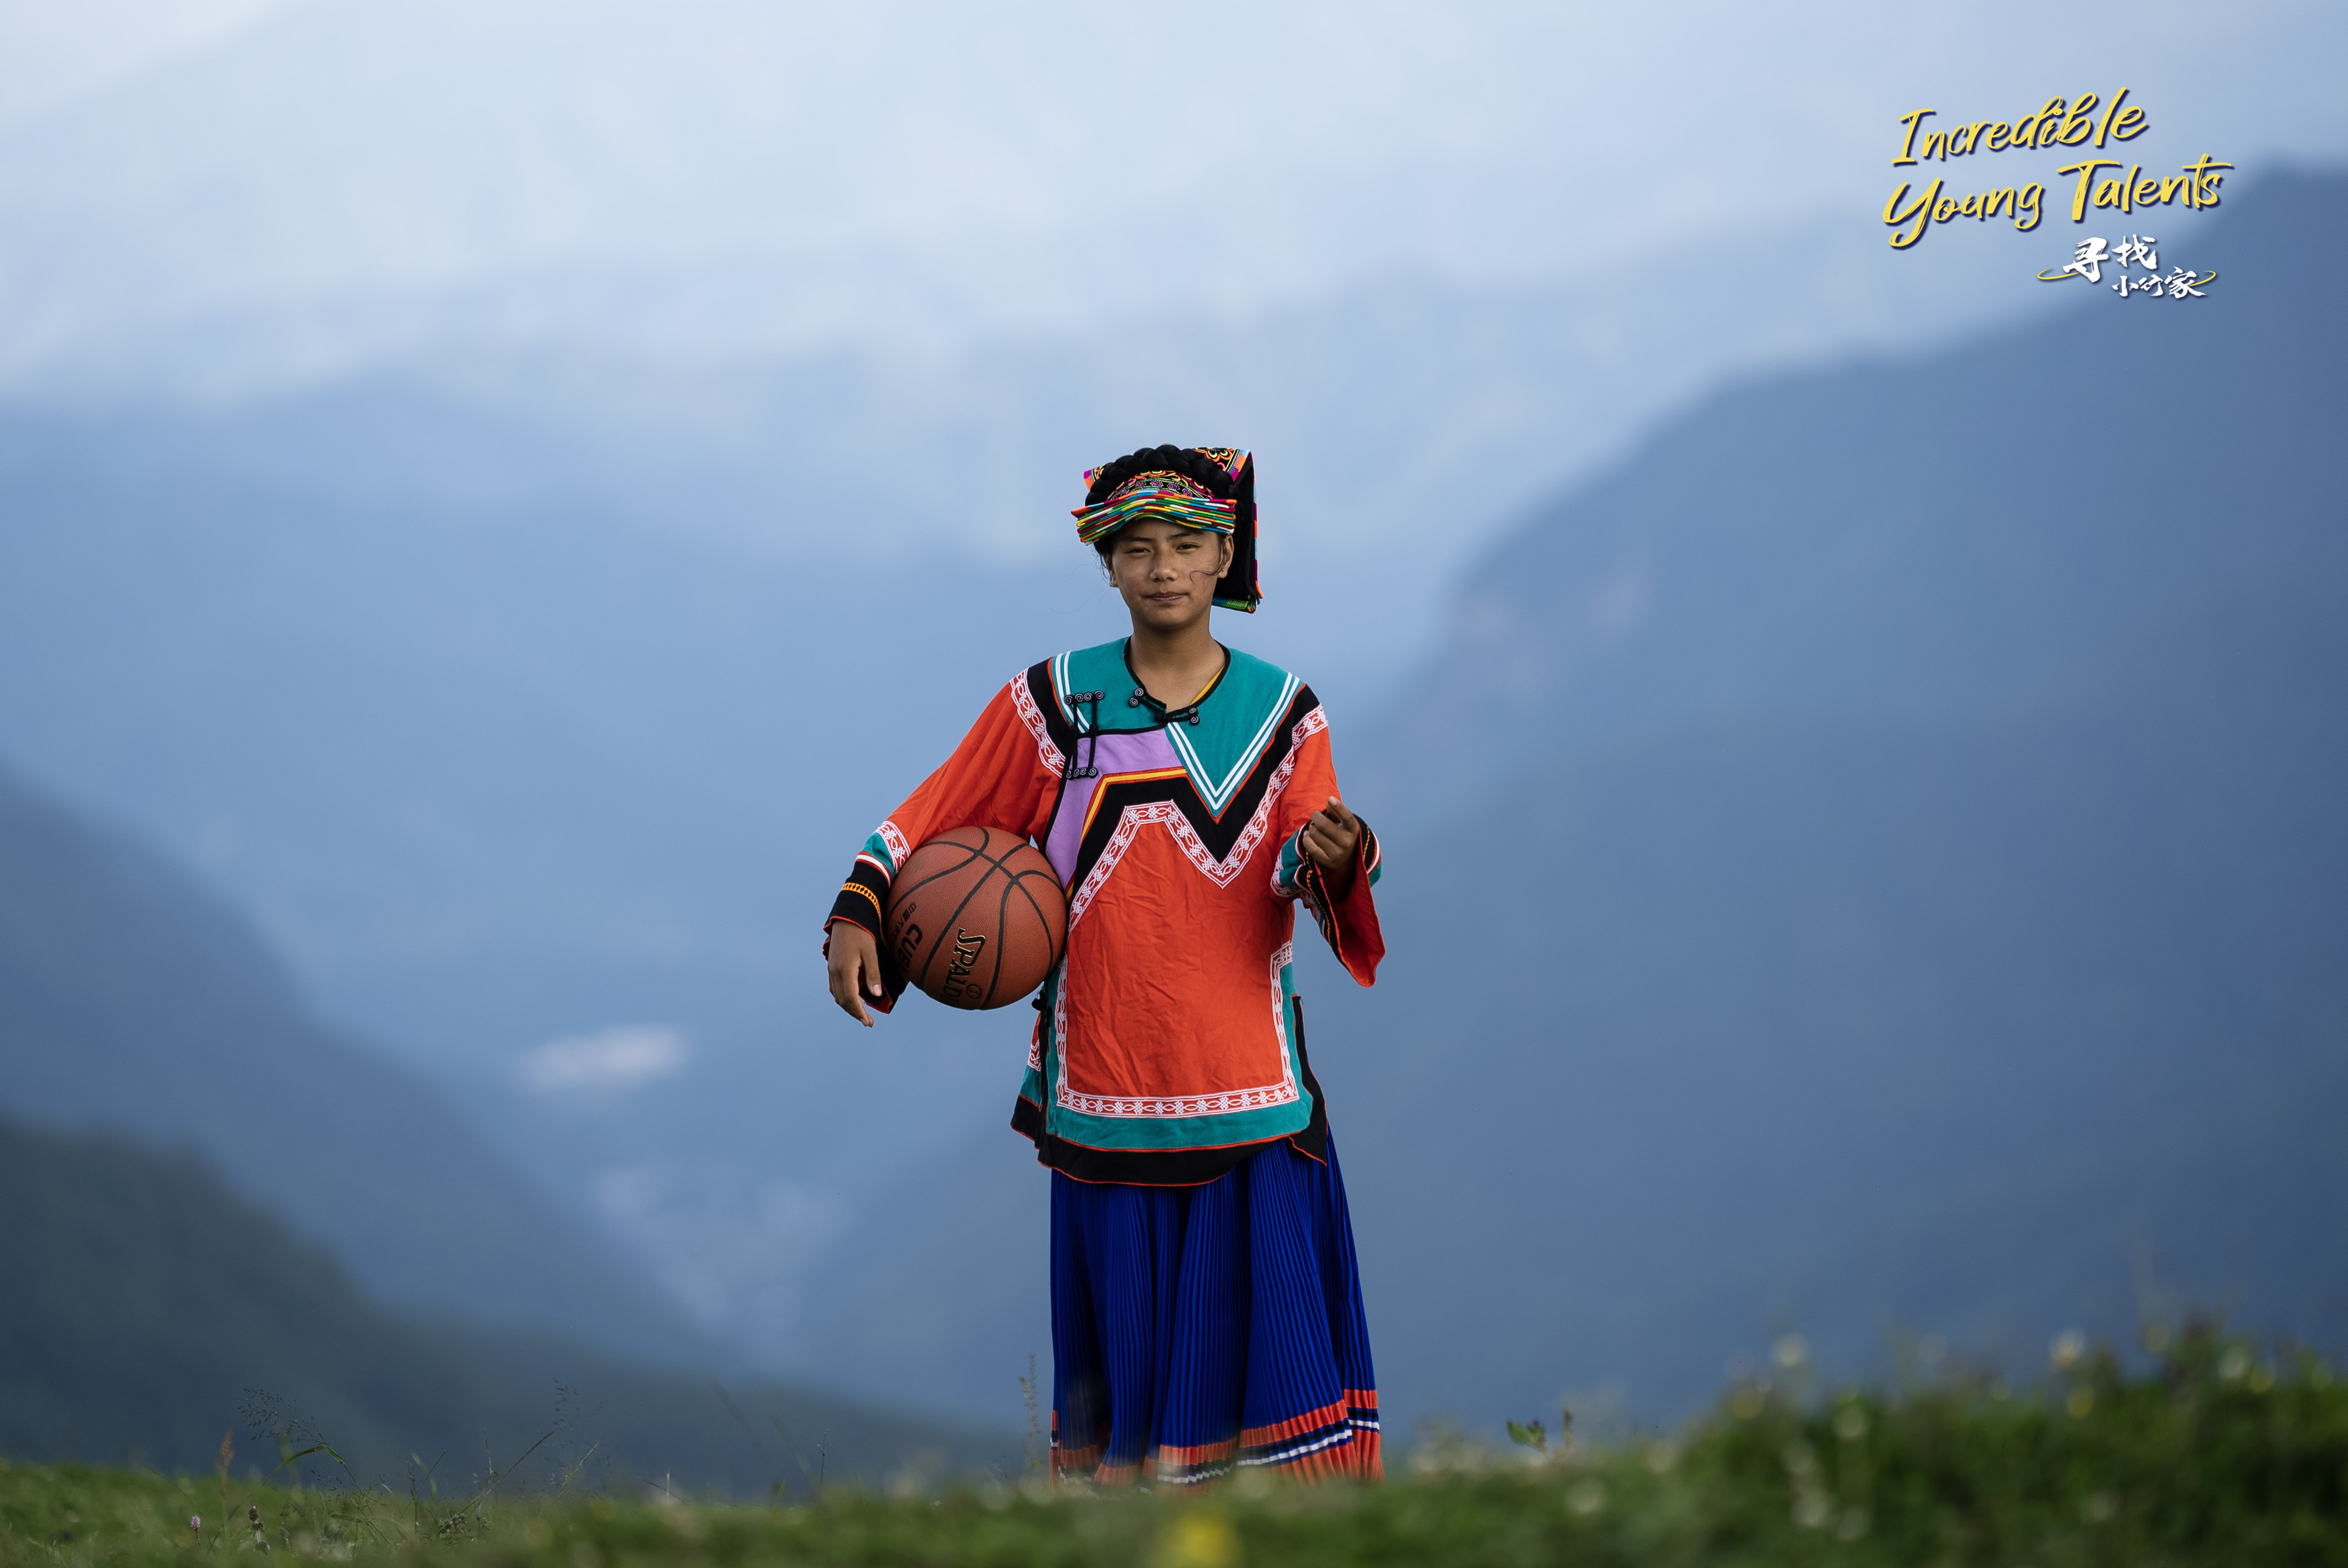 An undated photo shows 13-year-old girl Aguolieha wearing Yi ethnic clothing with a basketball under her arm in the mountainous Liangshan Yi Autonomous Prefecture in southwest China's Sichuan Province. /CGTN